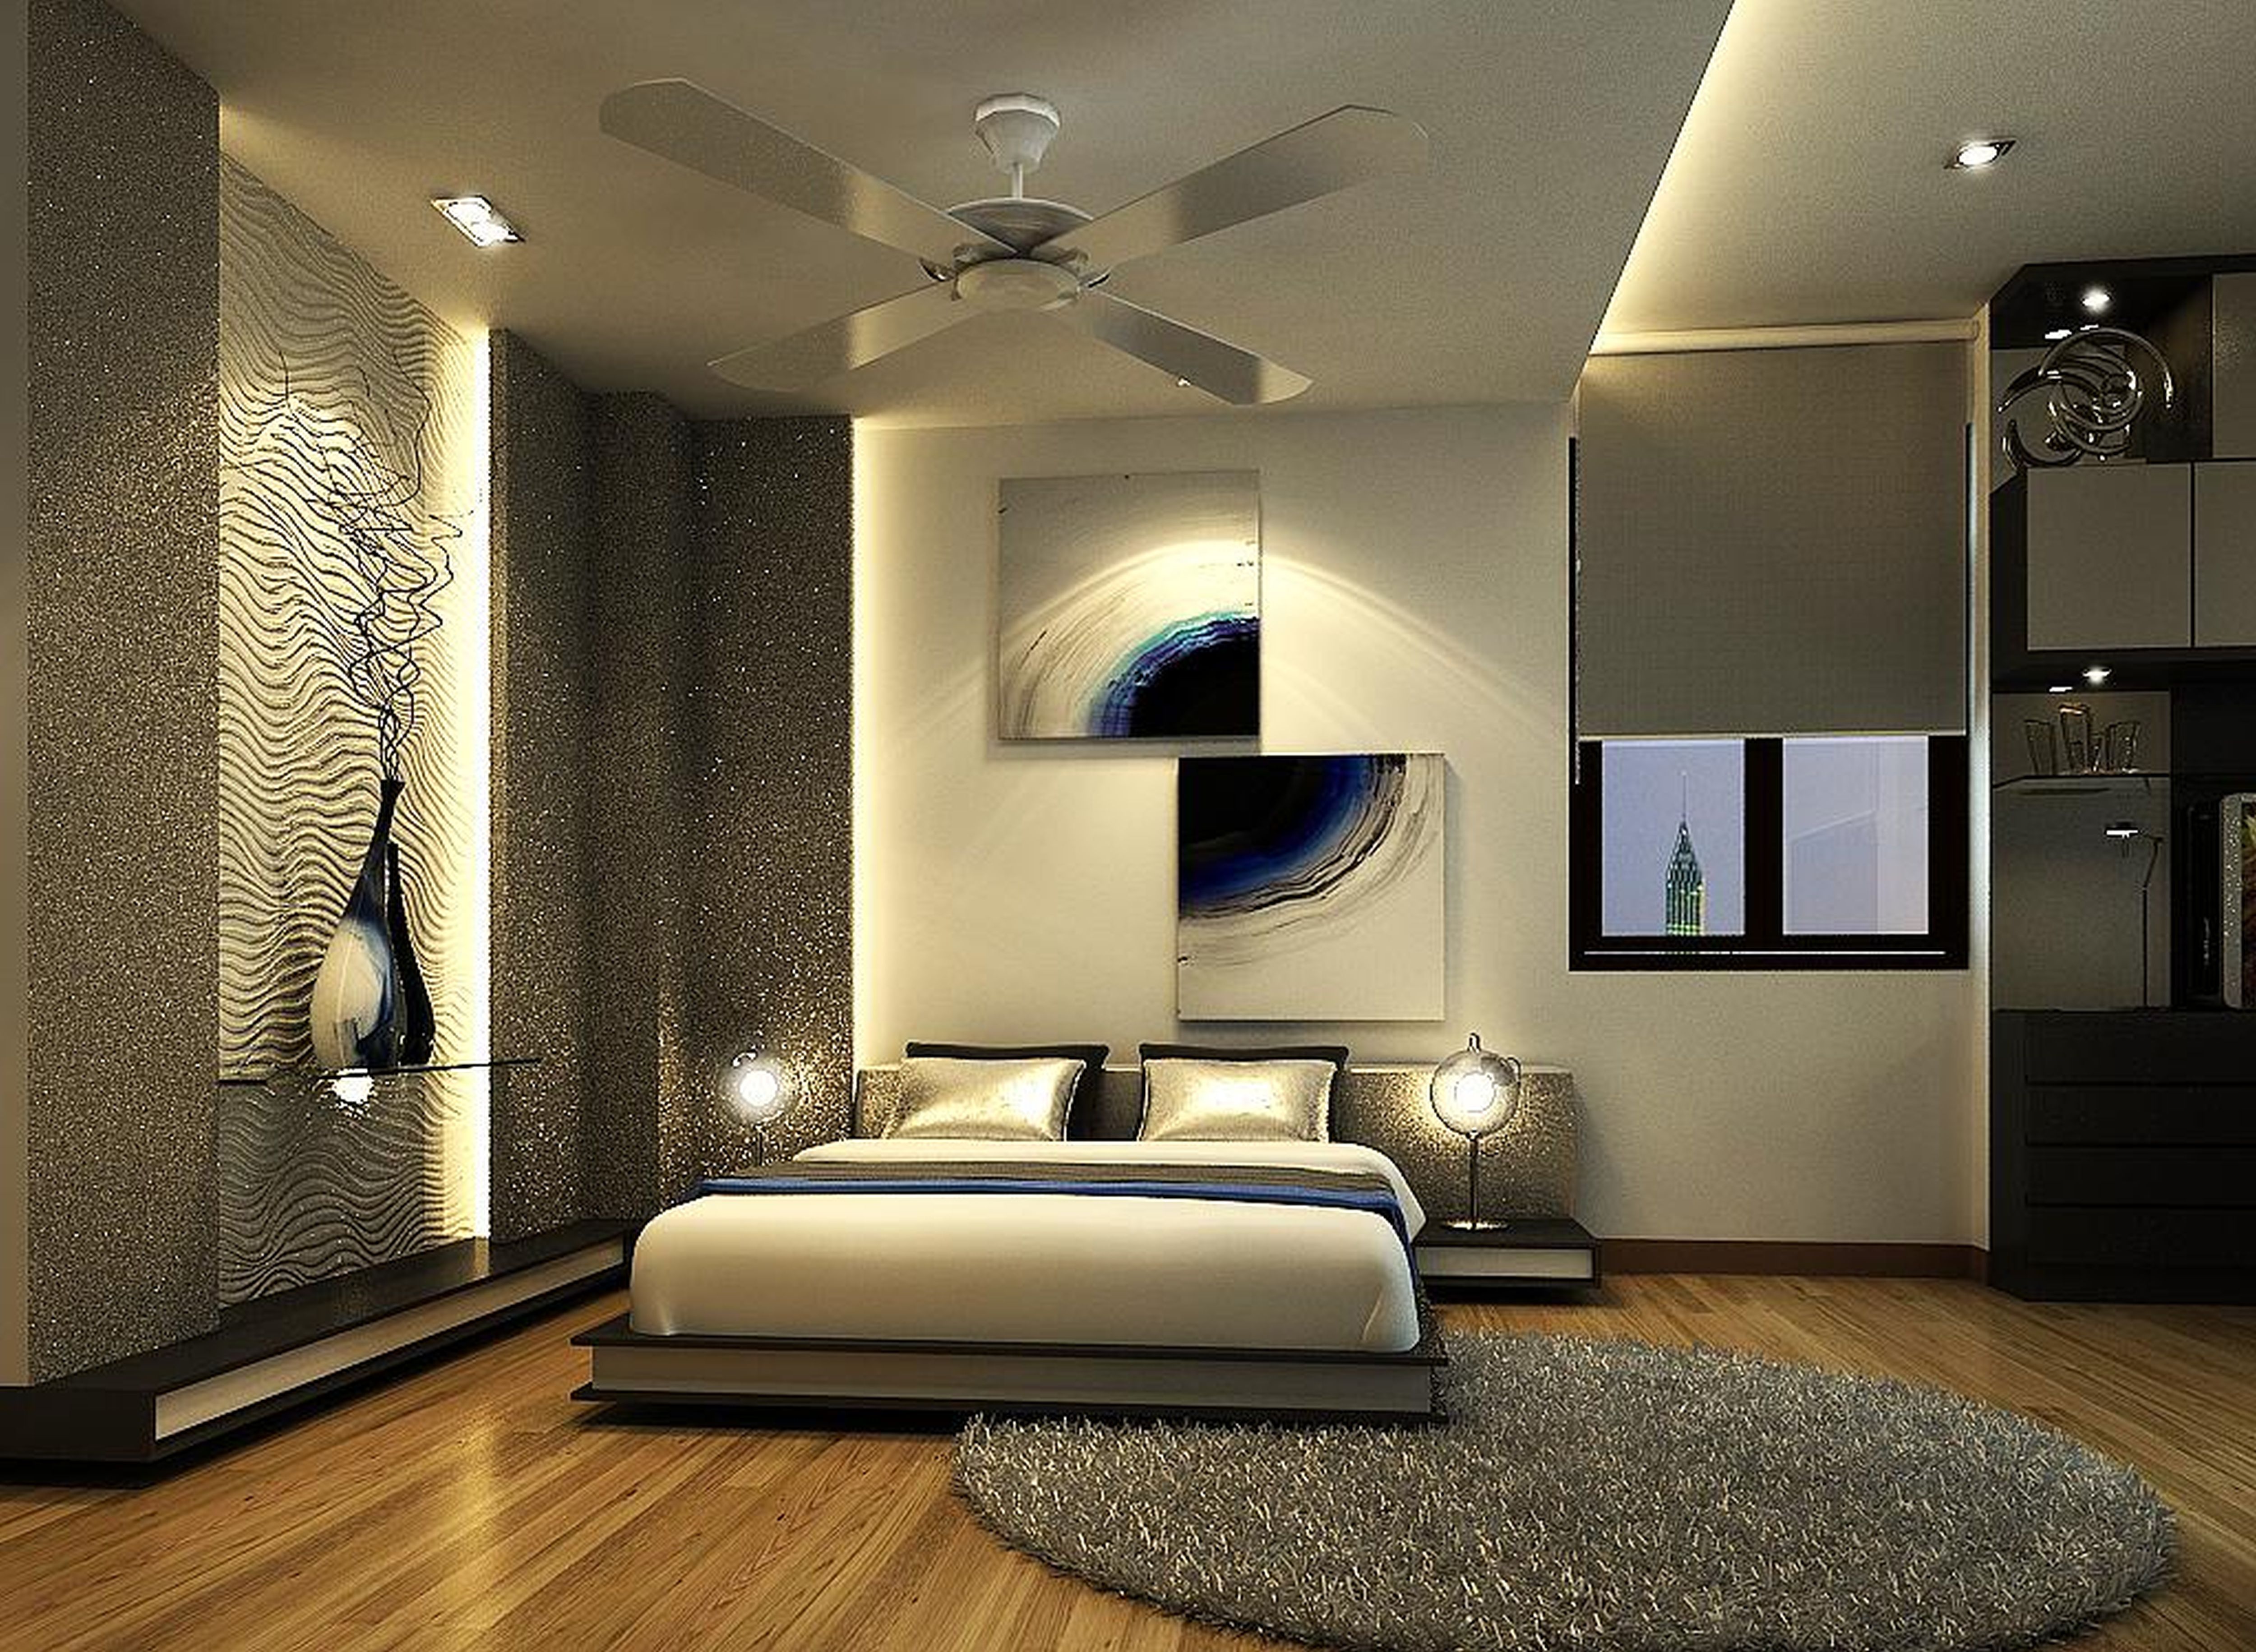 Good Ideas On Decorating Bedrooms